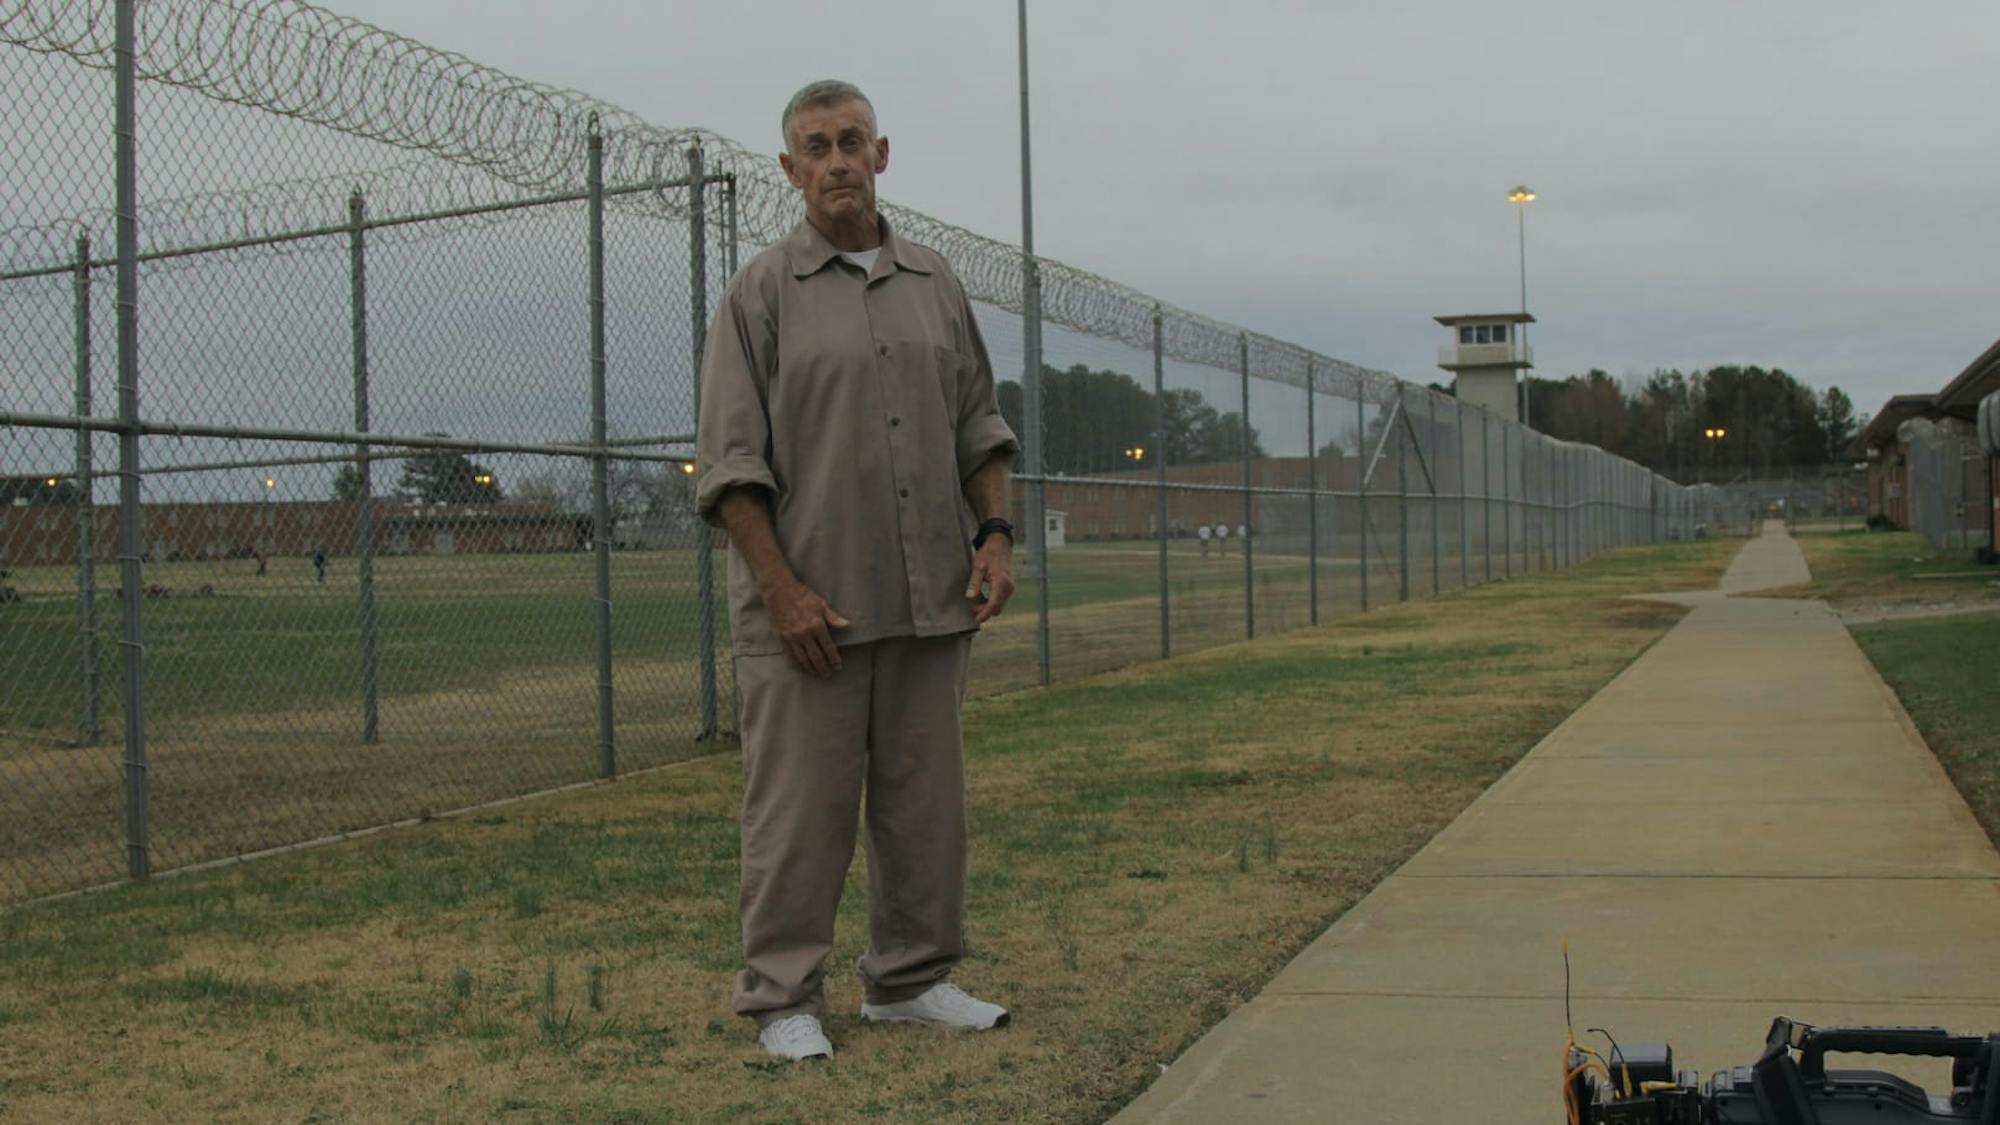 A shot from The Staircase. Michael Peterson wears tan prisonwear and stands on the grass between a sidewalk and a barbed fence.